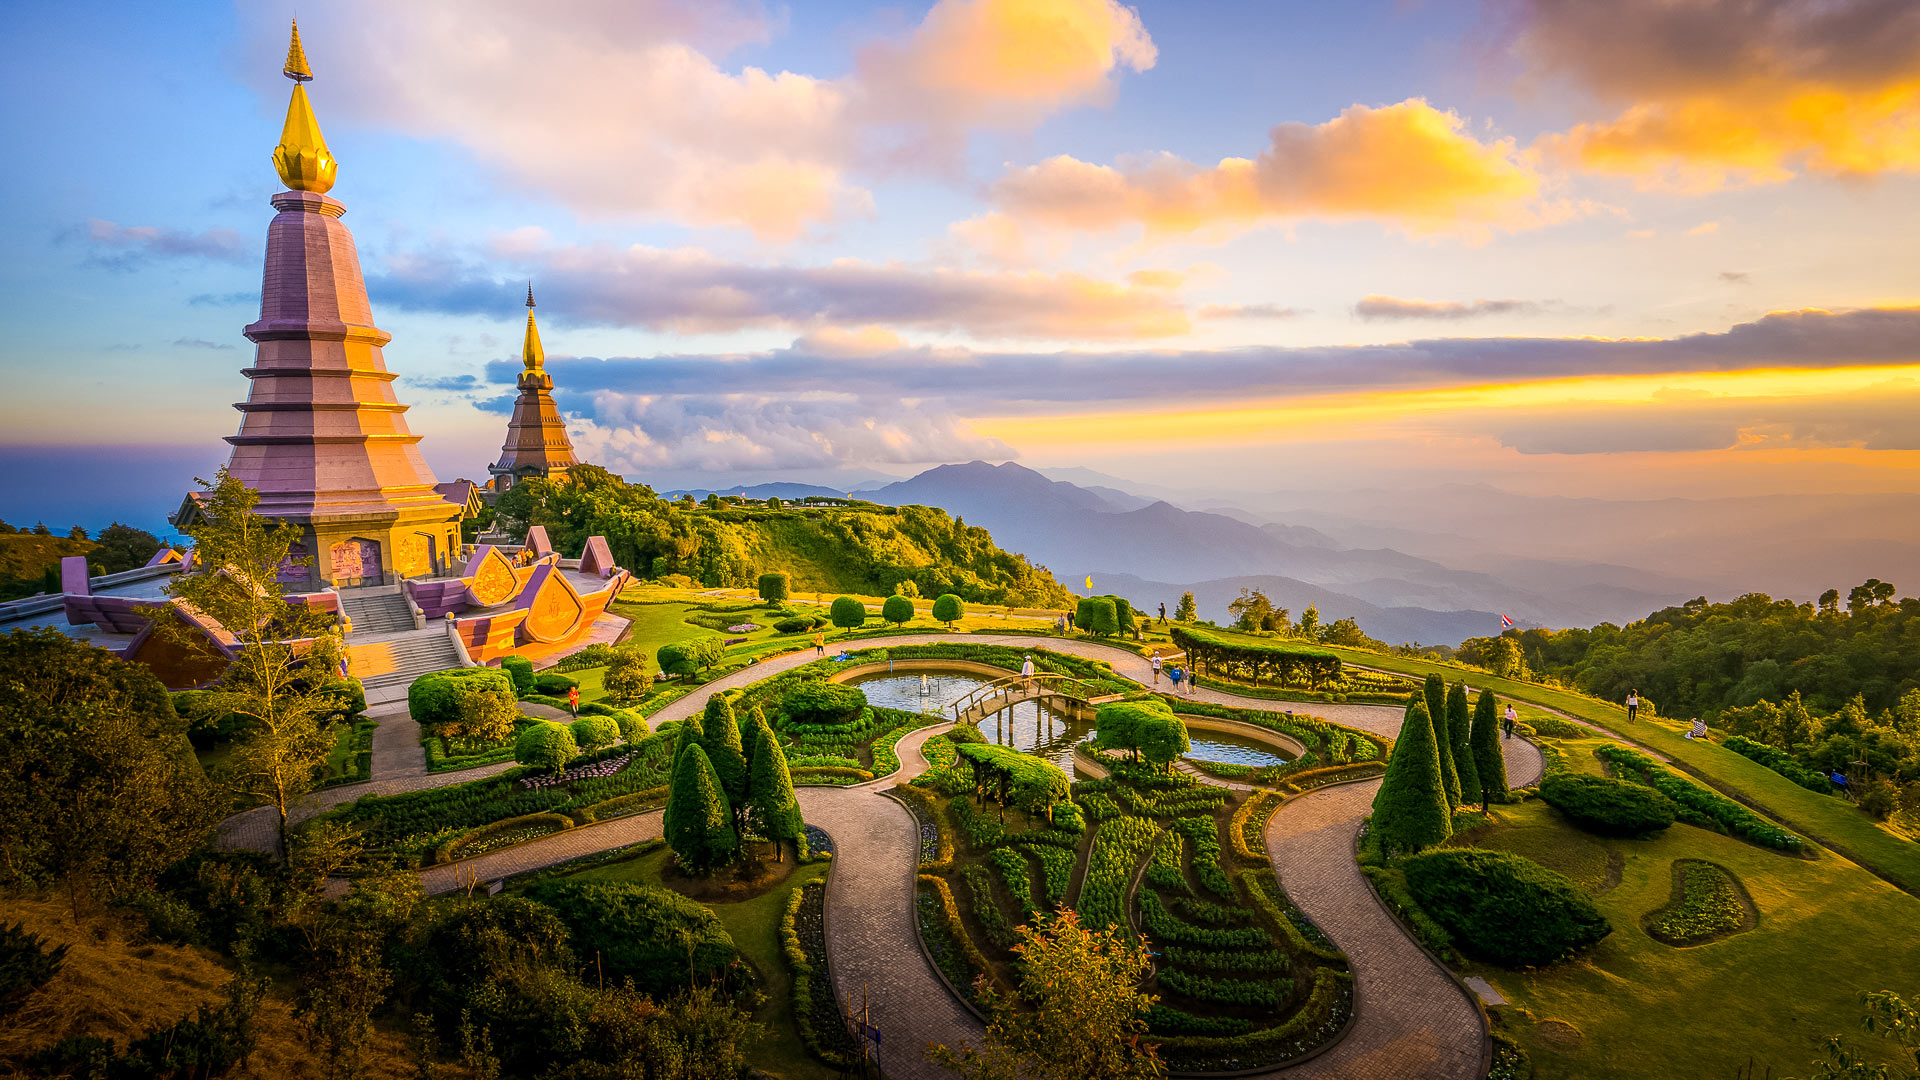 20 Best Things To Do In Chiang Mai 1 2 3 Days Visit Chiang Mai 2020